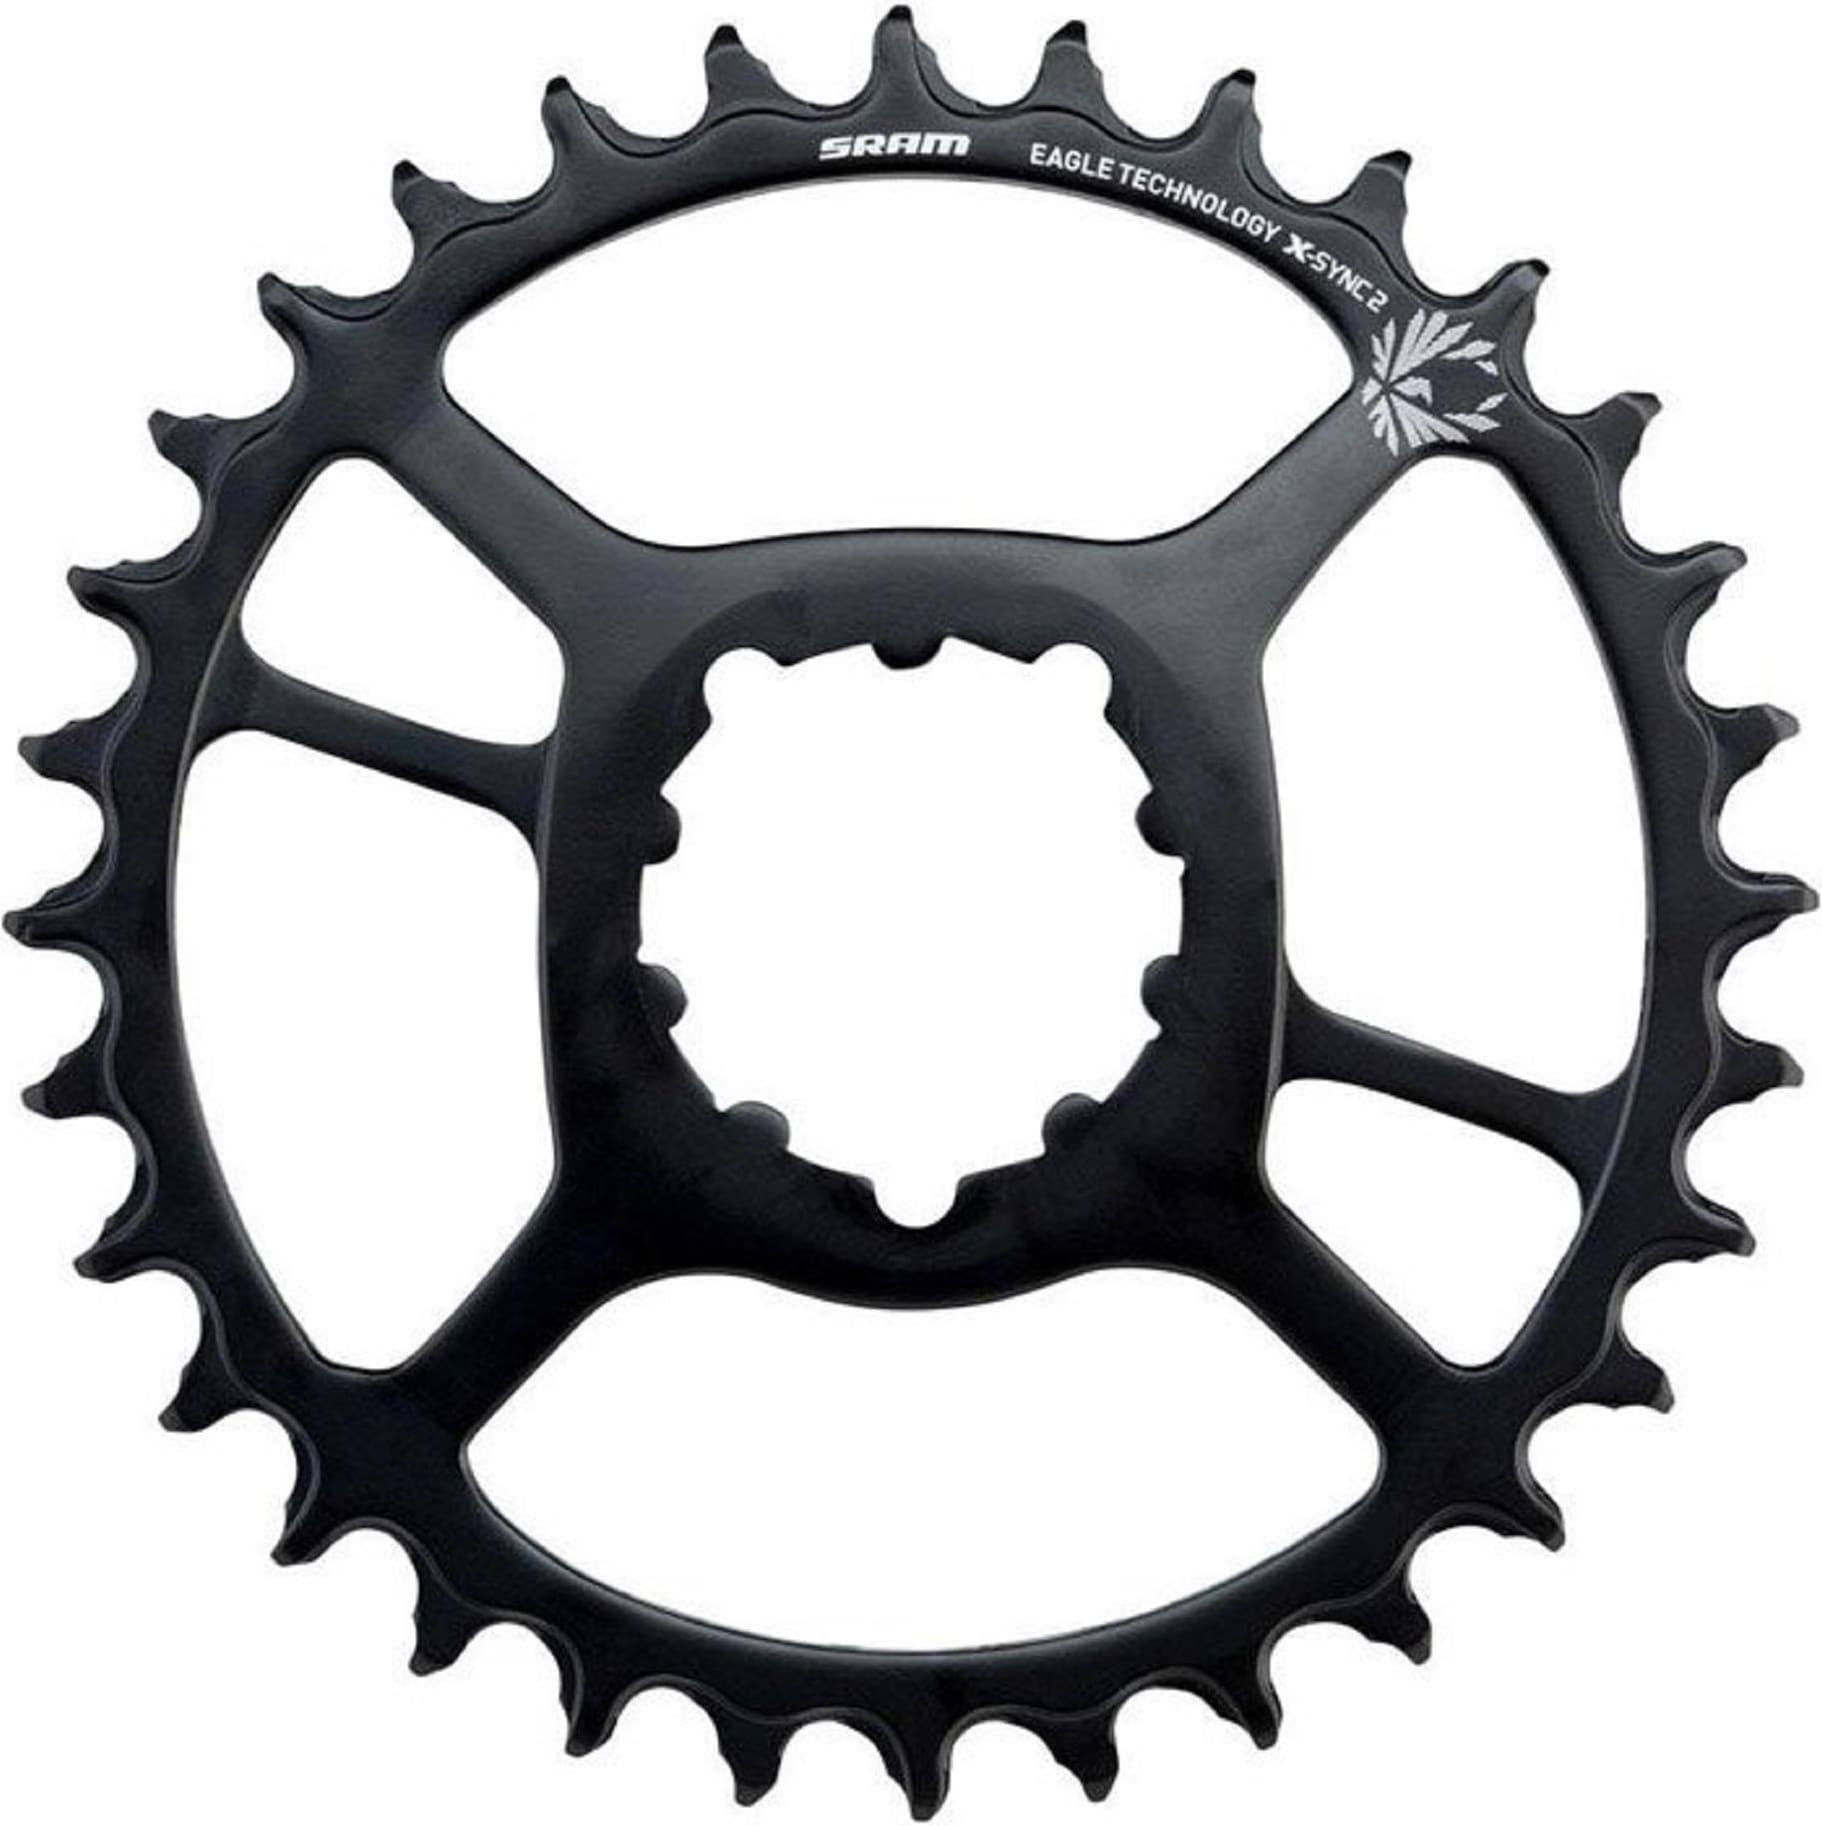 Sram X-Sync 2 Eagle Steel Direct Mount Chainring - 30T Boost, 3mm Offset